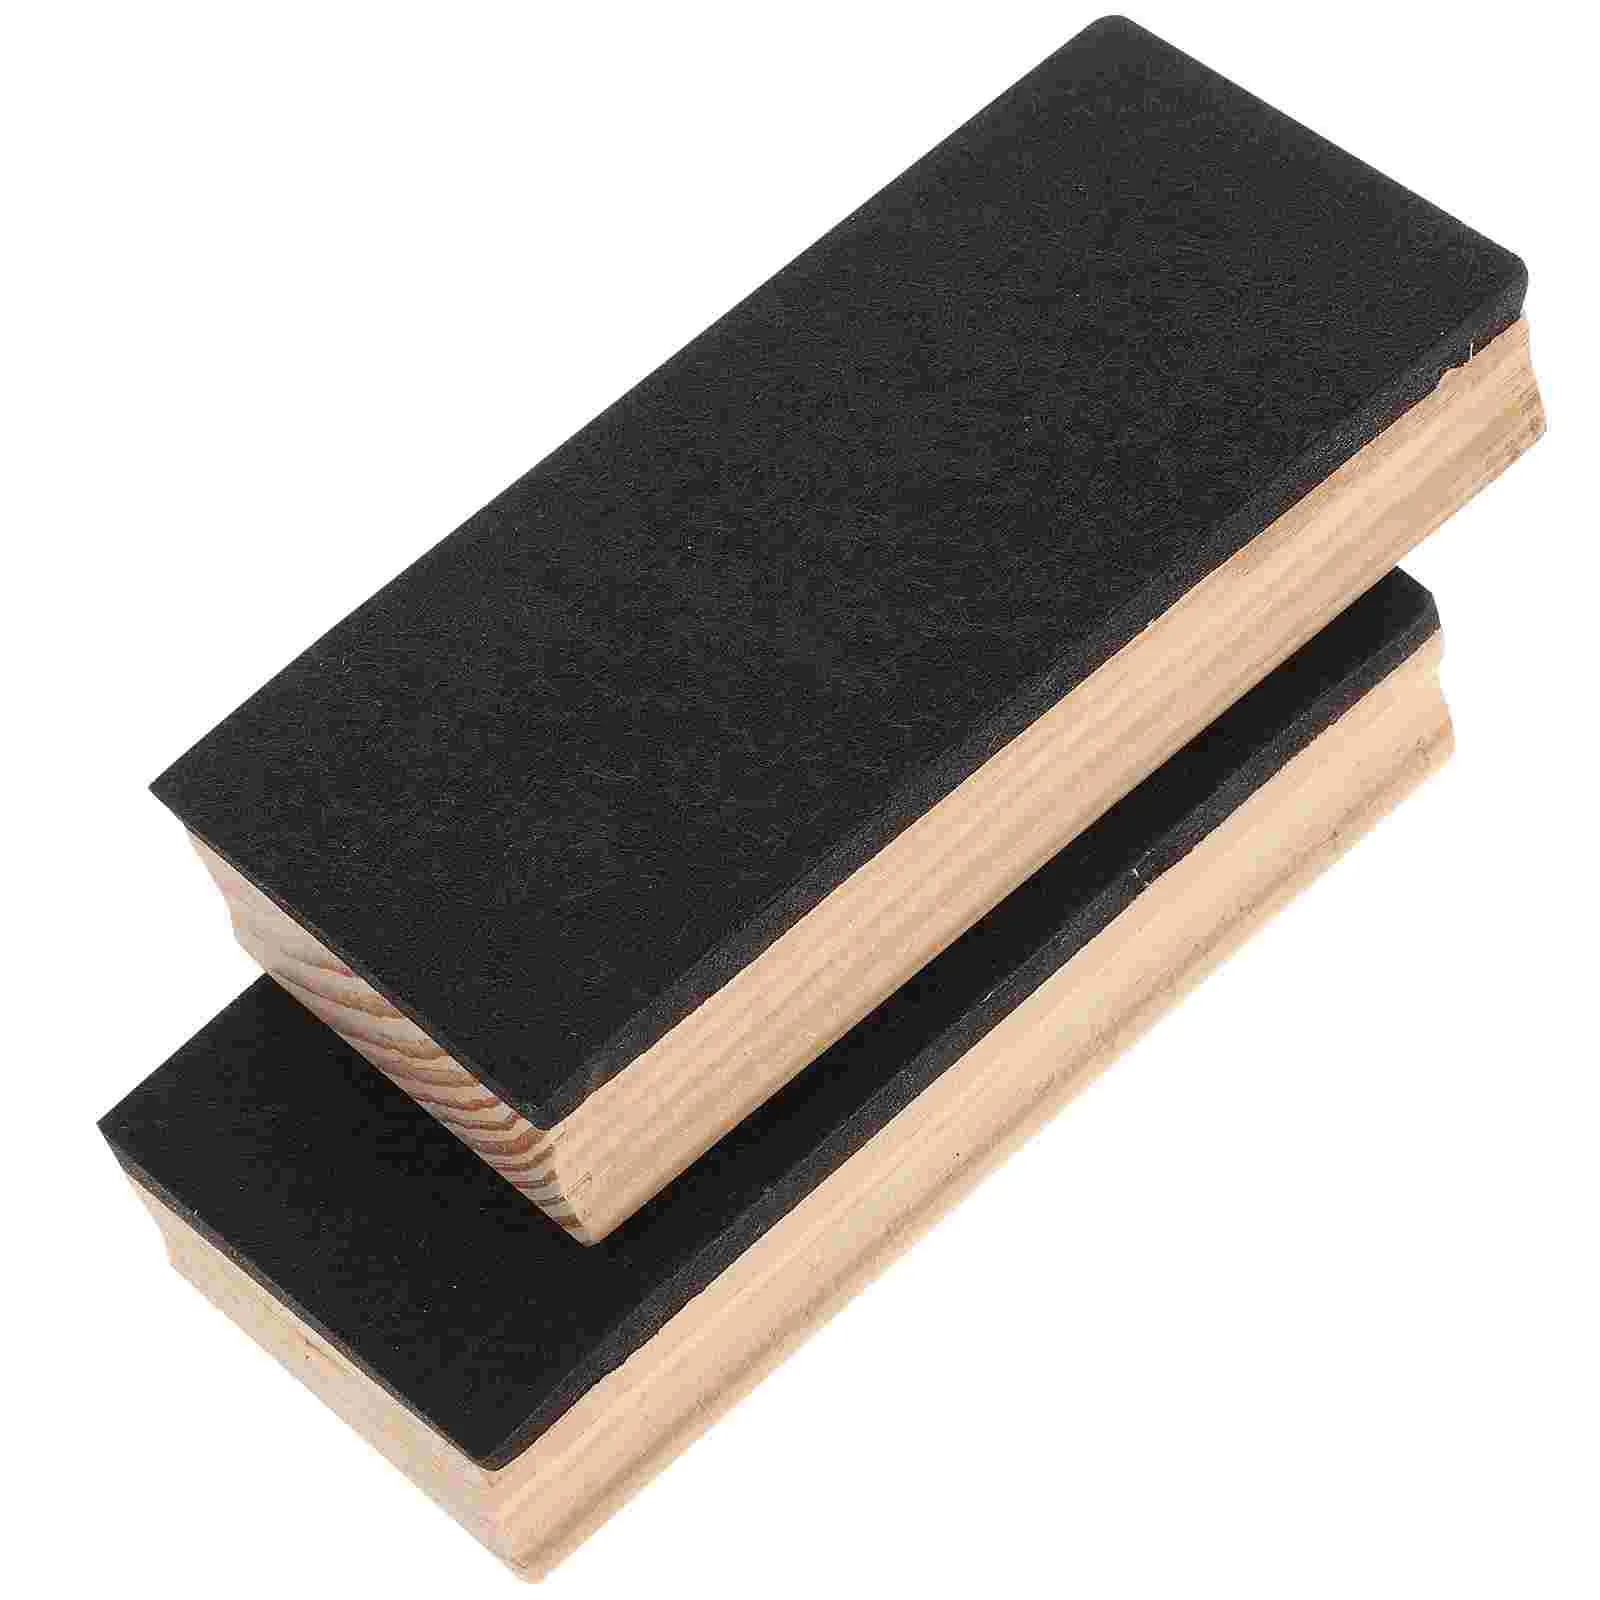 

2 Pcs Whiteboard Eraser Blackboard Chalkboard Cleaners for School Portable Erasers Classroom Dust Free Cloth Wood Accessories